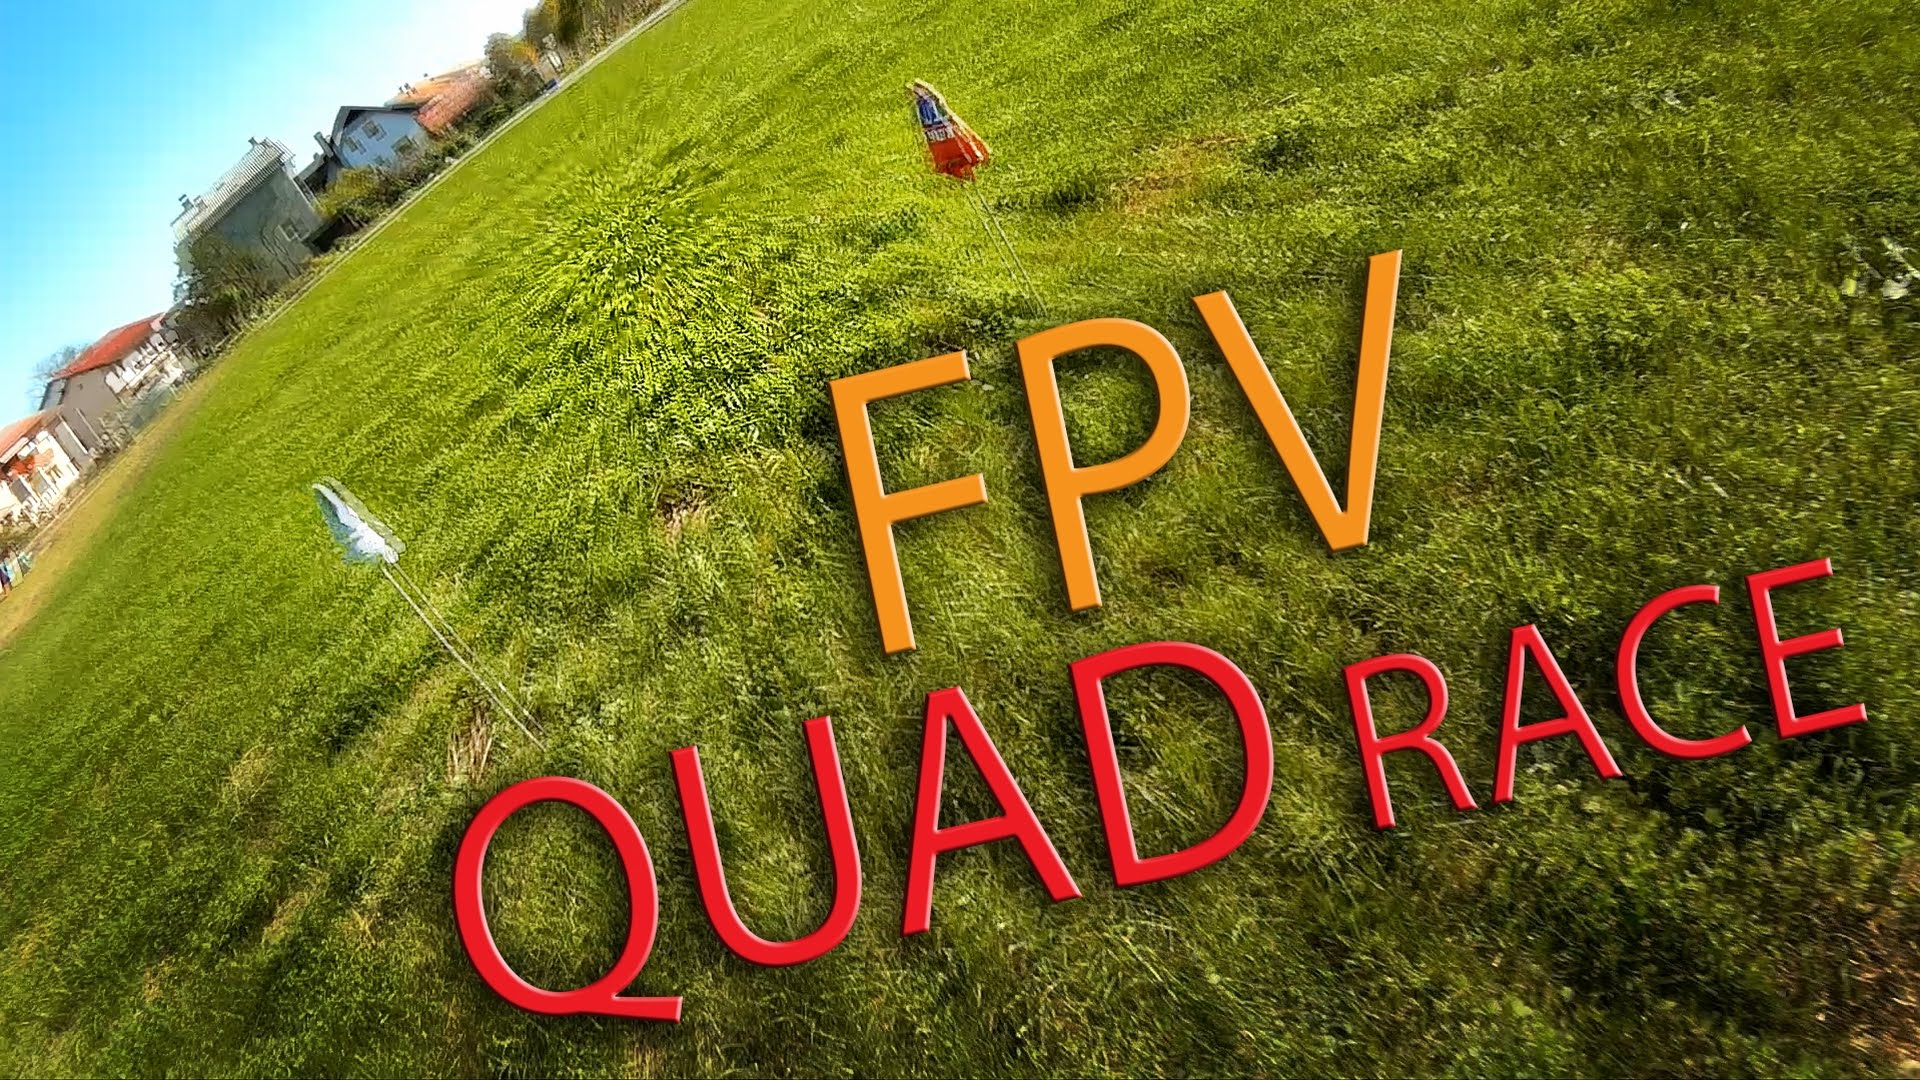 FASTEST and most DANGEROUS FPV RACE ever!